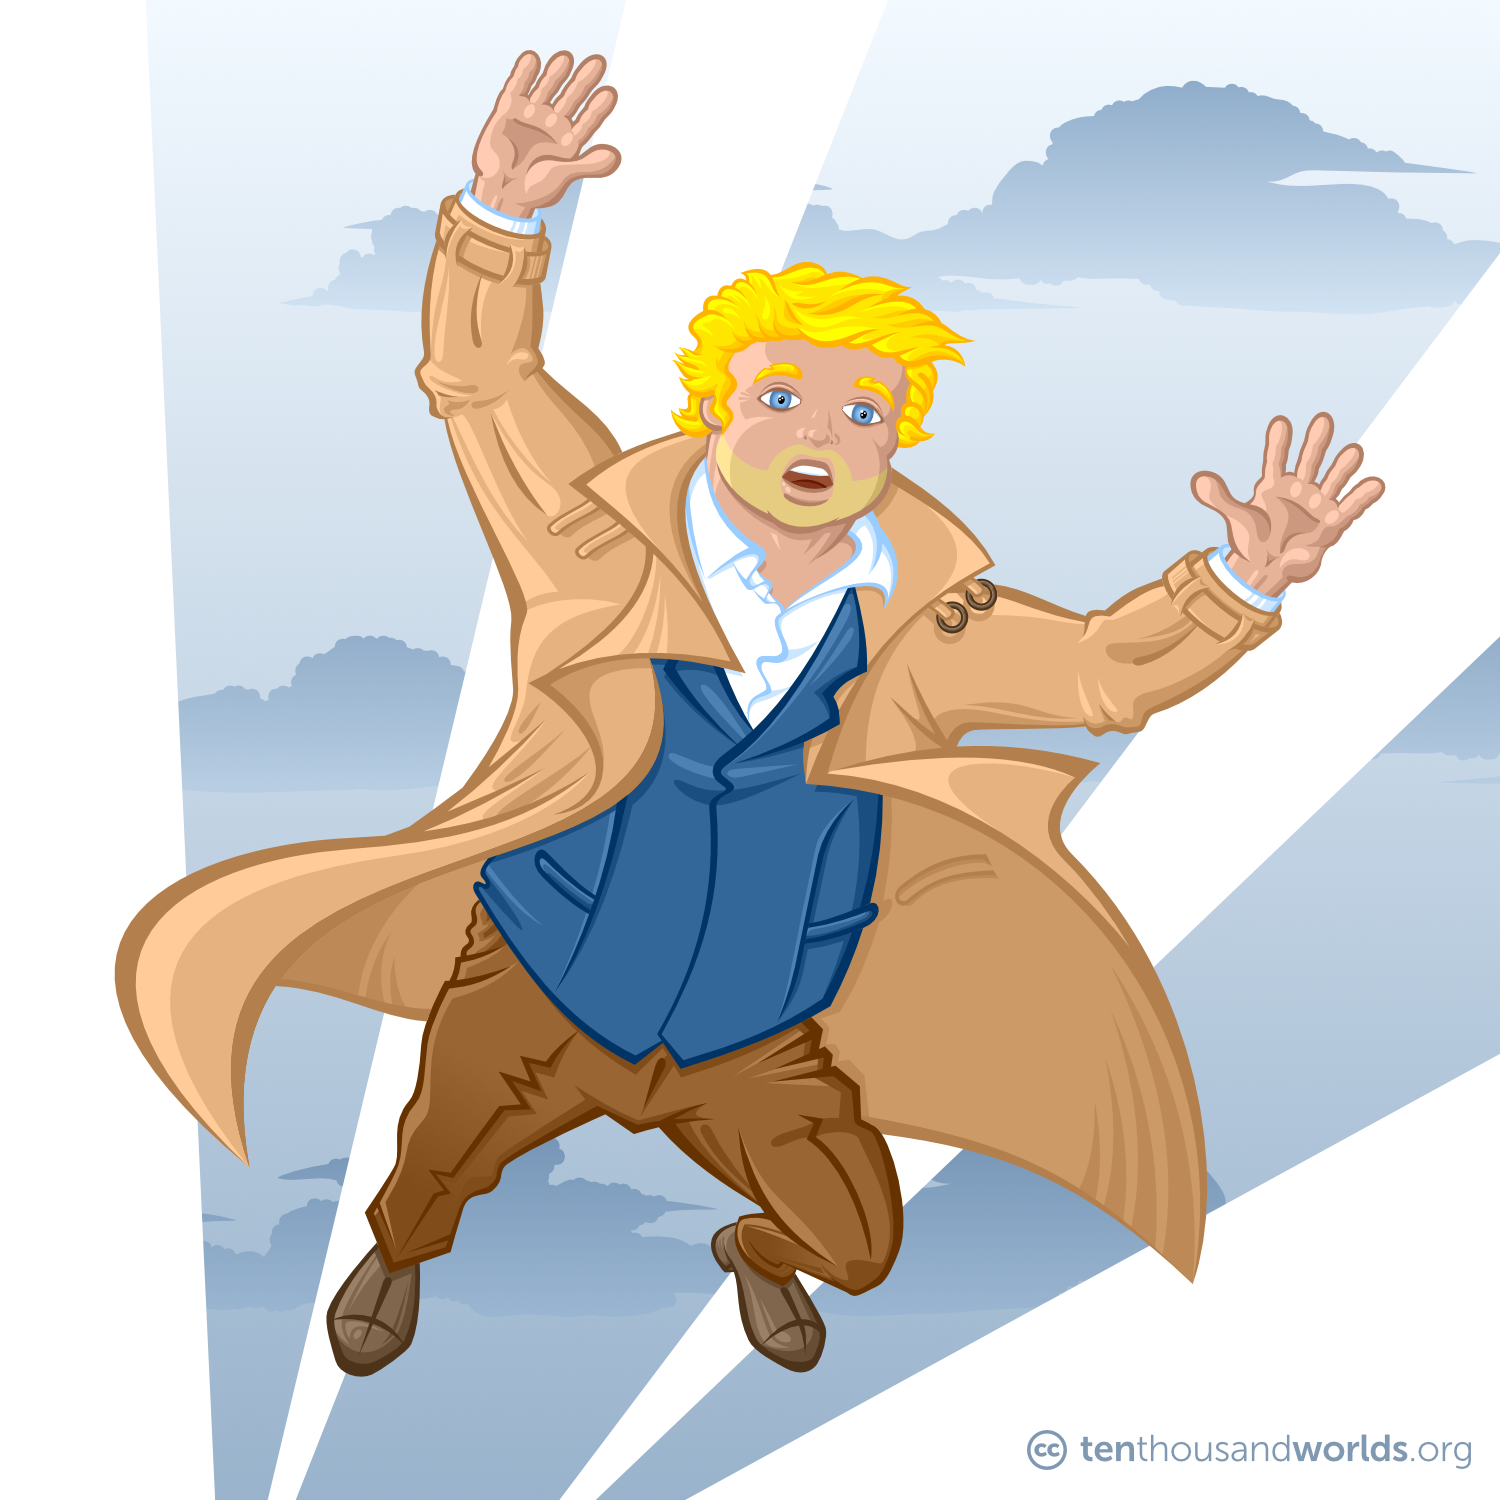 A chubby man with unkept hair and a three-day blond beard, wearing a large flapping tan coat, flying through the air.